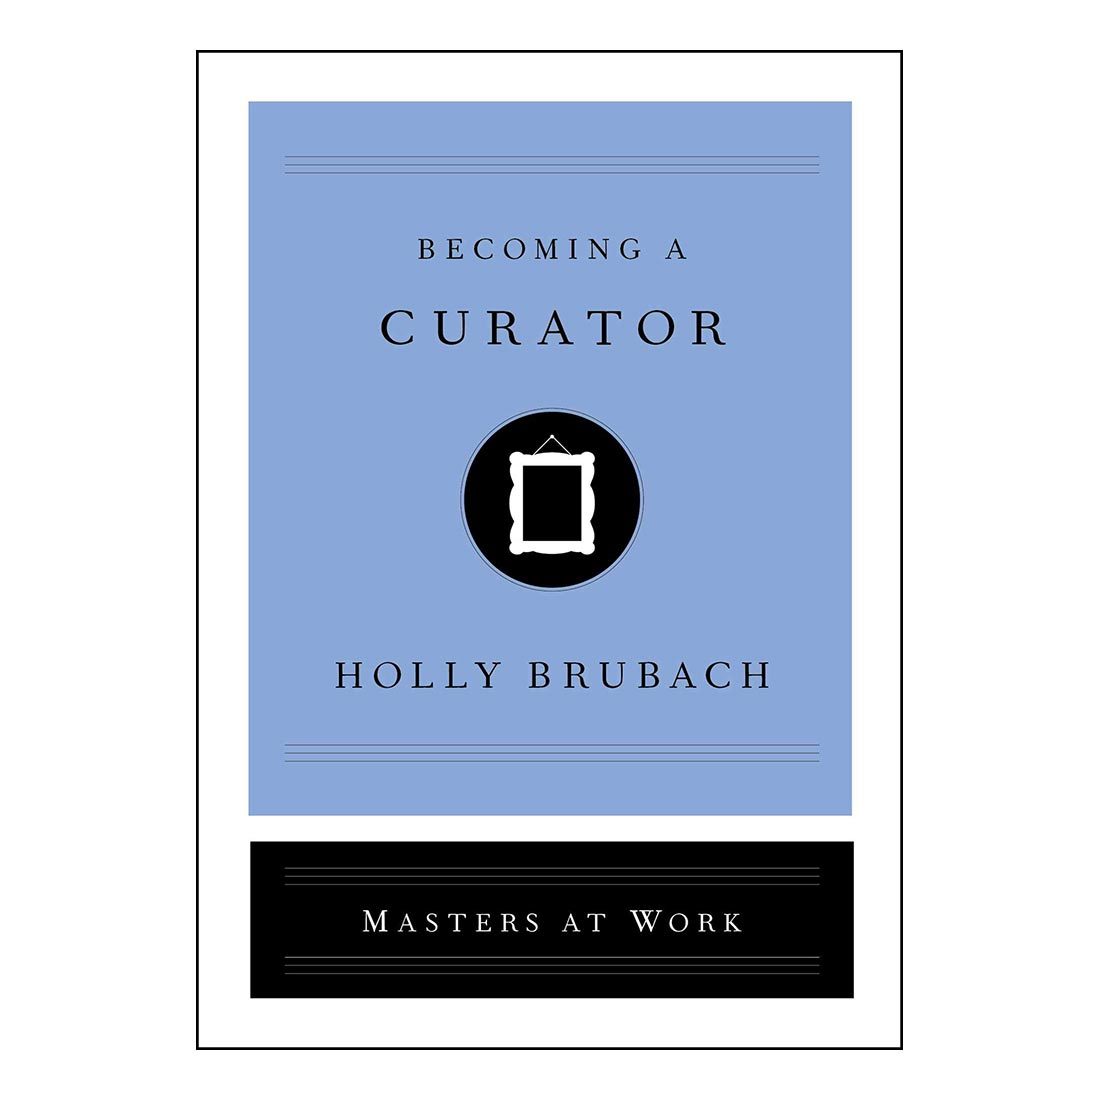 Becoming a Curator